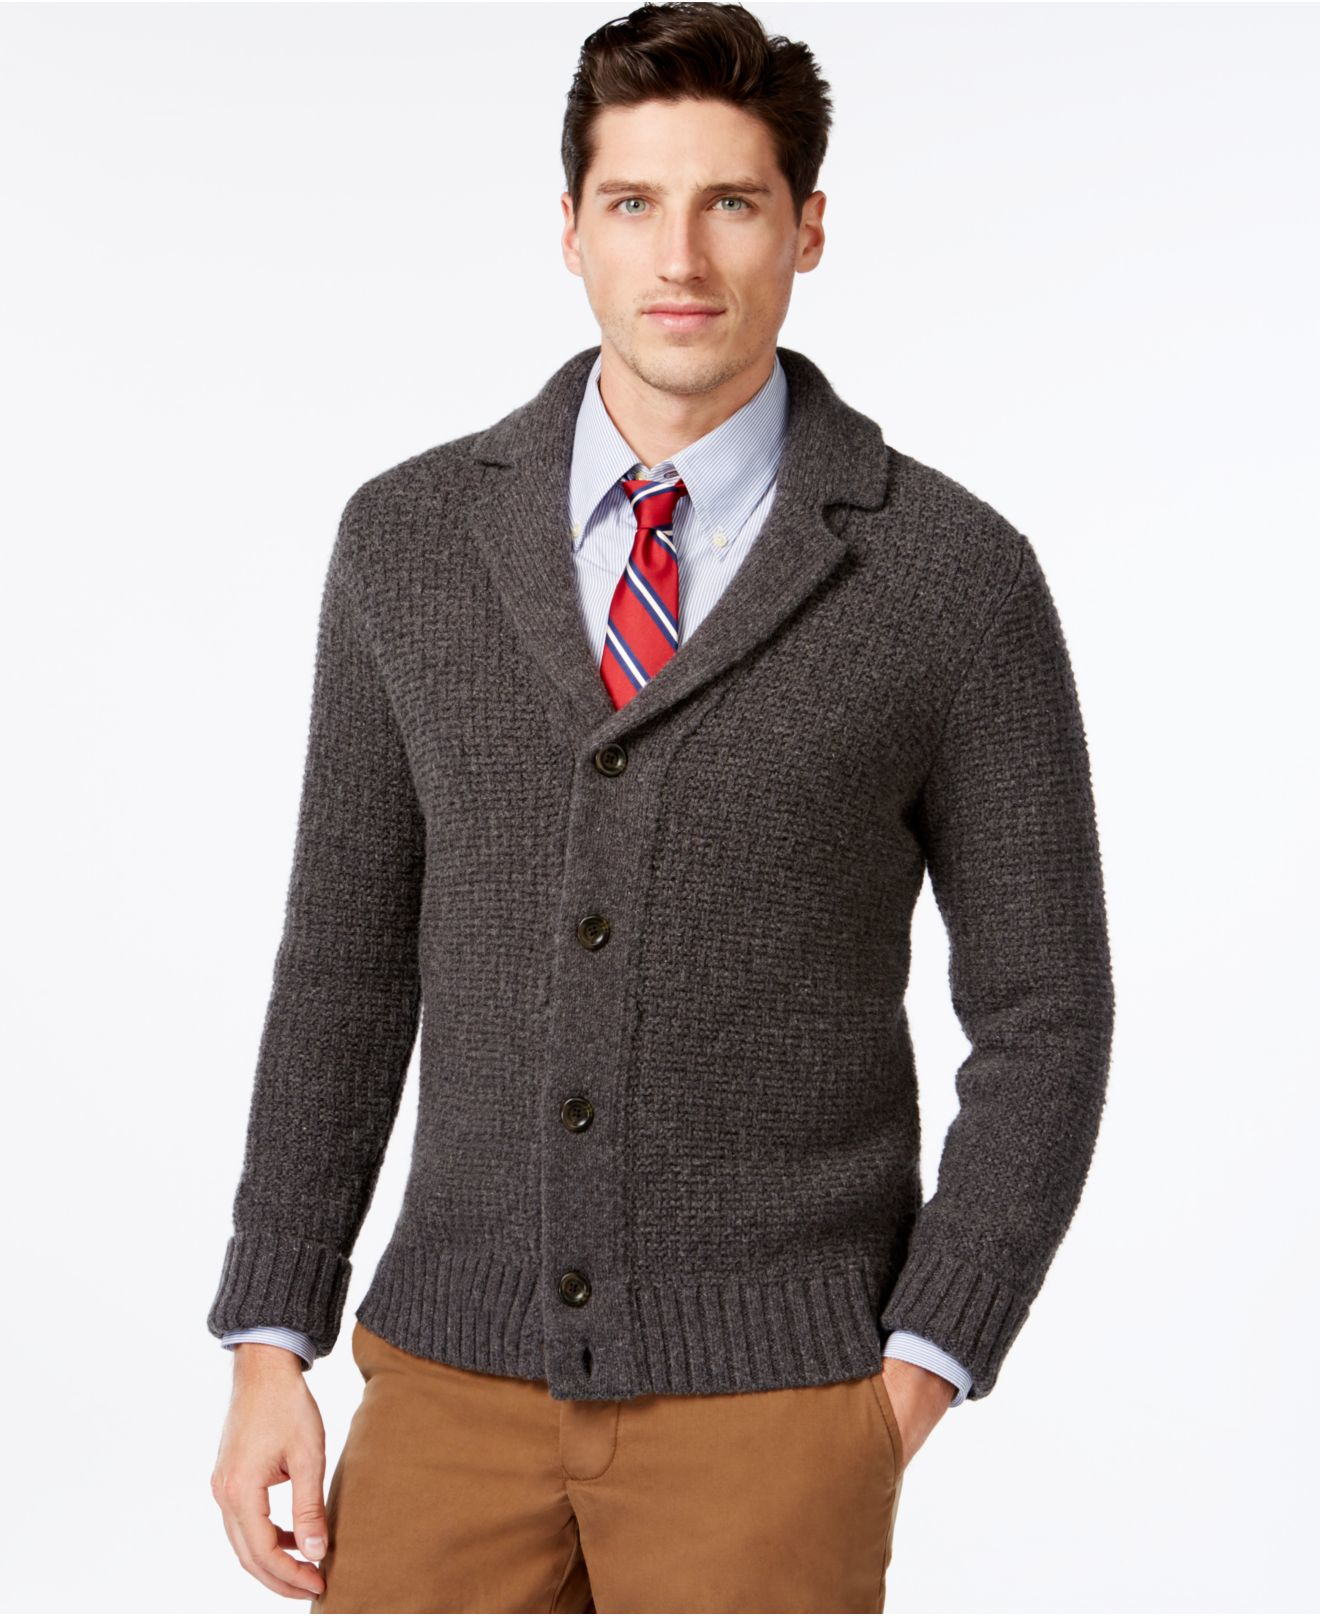 How to combine a Tommy Hilfiger cardigan